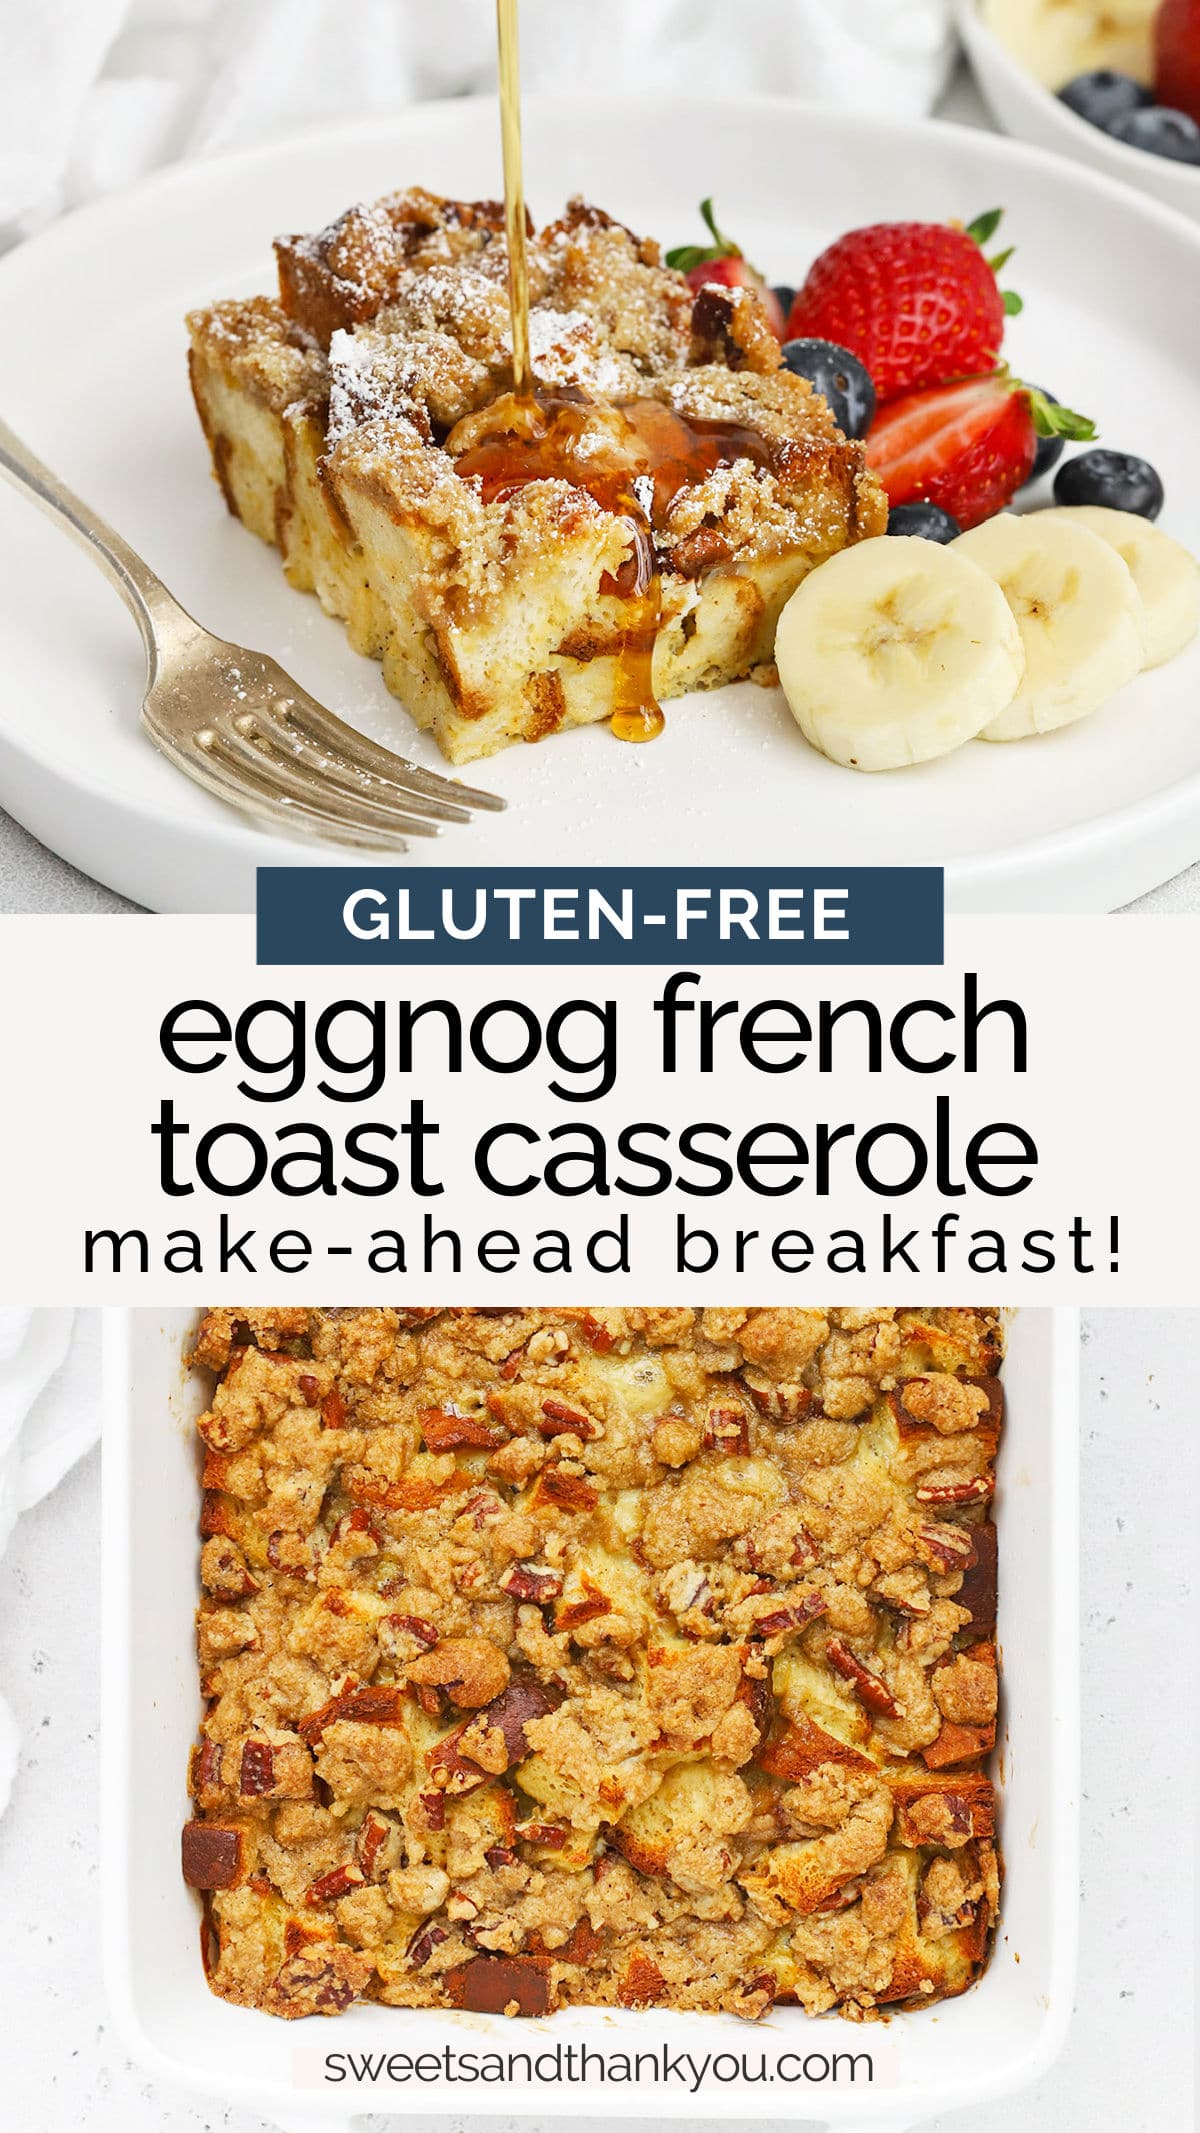 Gluten-Free Eggnog French Toast Casserole - This eggnog baked french toast is a delightful make-ahead holiday breakfast. We love the warm spices & how easy it is to make! // gluten free baked French toast // gluten free French toast bake // eggnog French toast baker // eggnog French toast casserole // gluten-free eggnog french toast // gluten free french toast recipe // gluten-free eggnog bread pudding